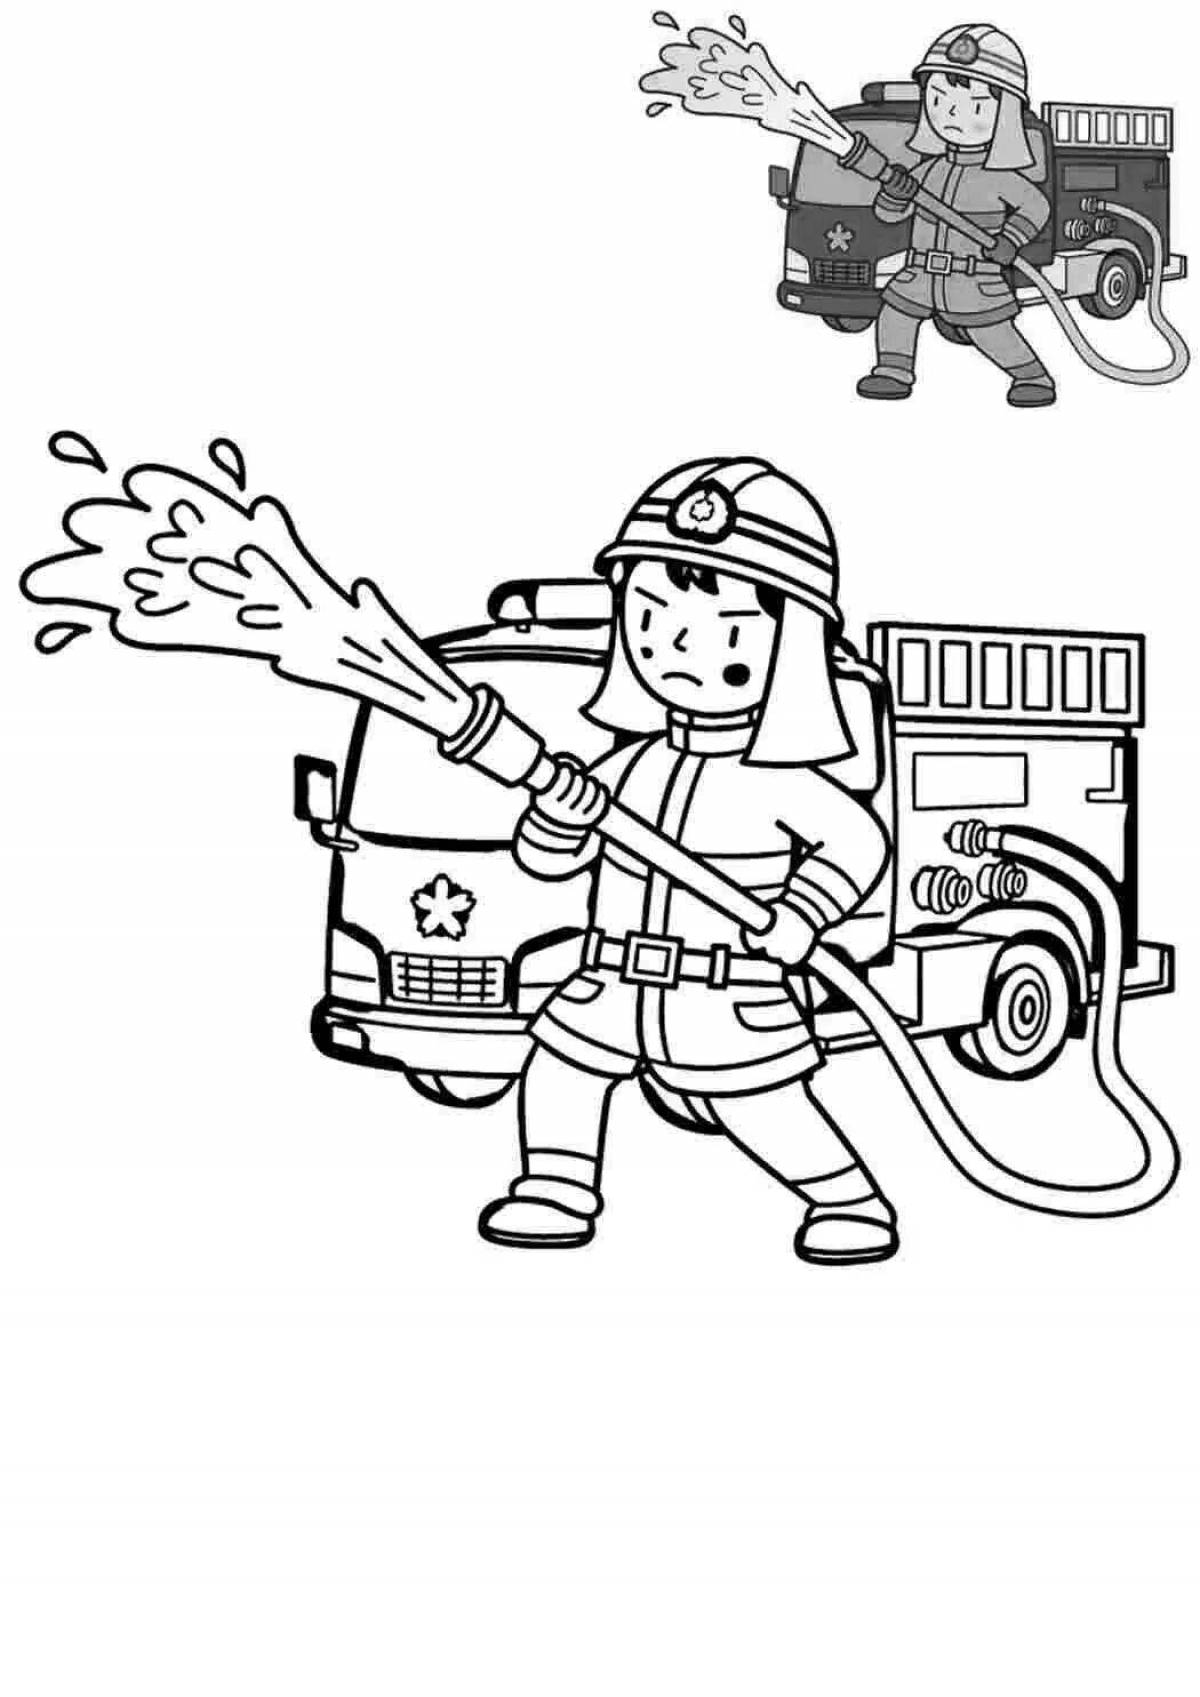 Great fireman coloring for kids